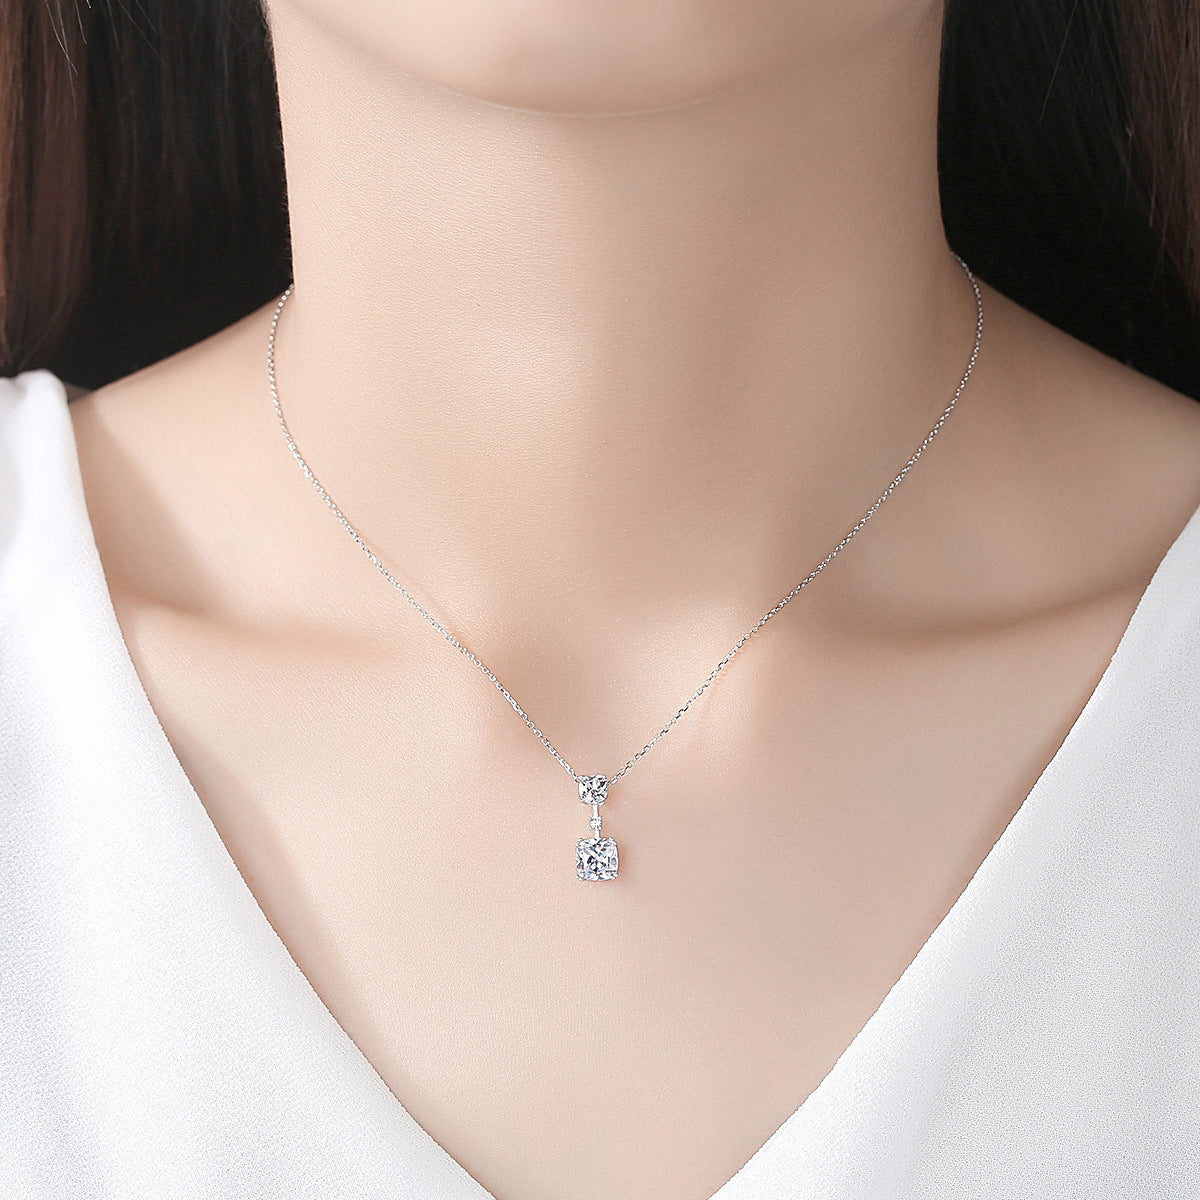 Simple Female Silver Necklace Silver Jewelry